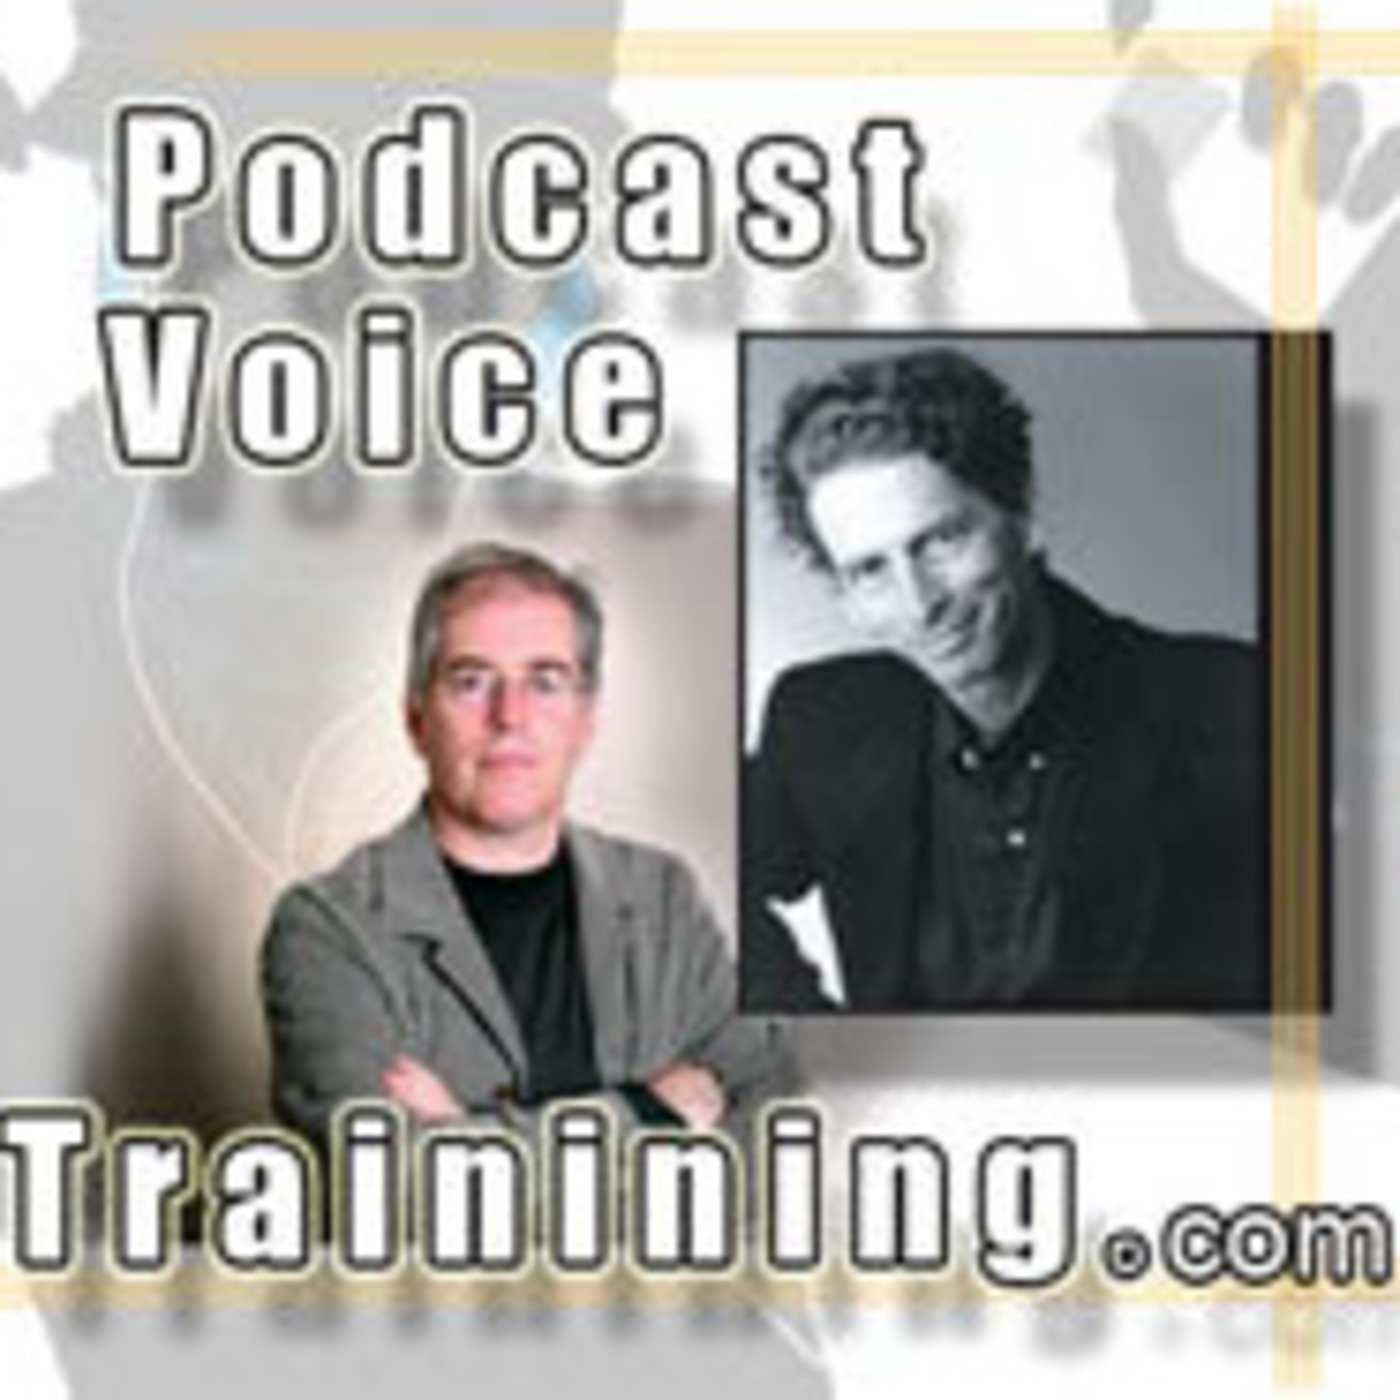 Voice Coaching for Podcasters - Enhance Your Voice - Part 2 - Podcast #3